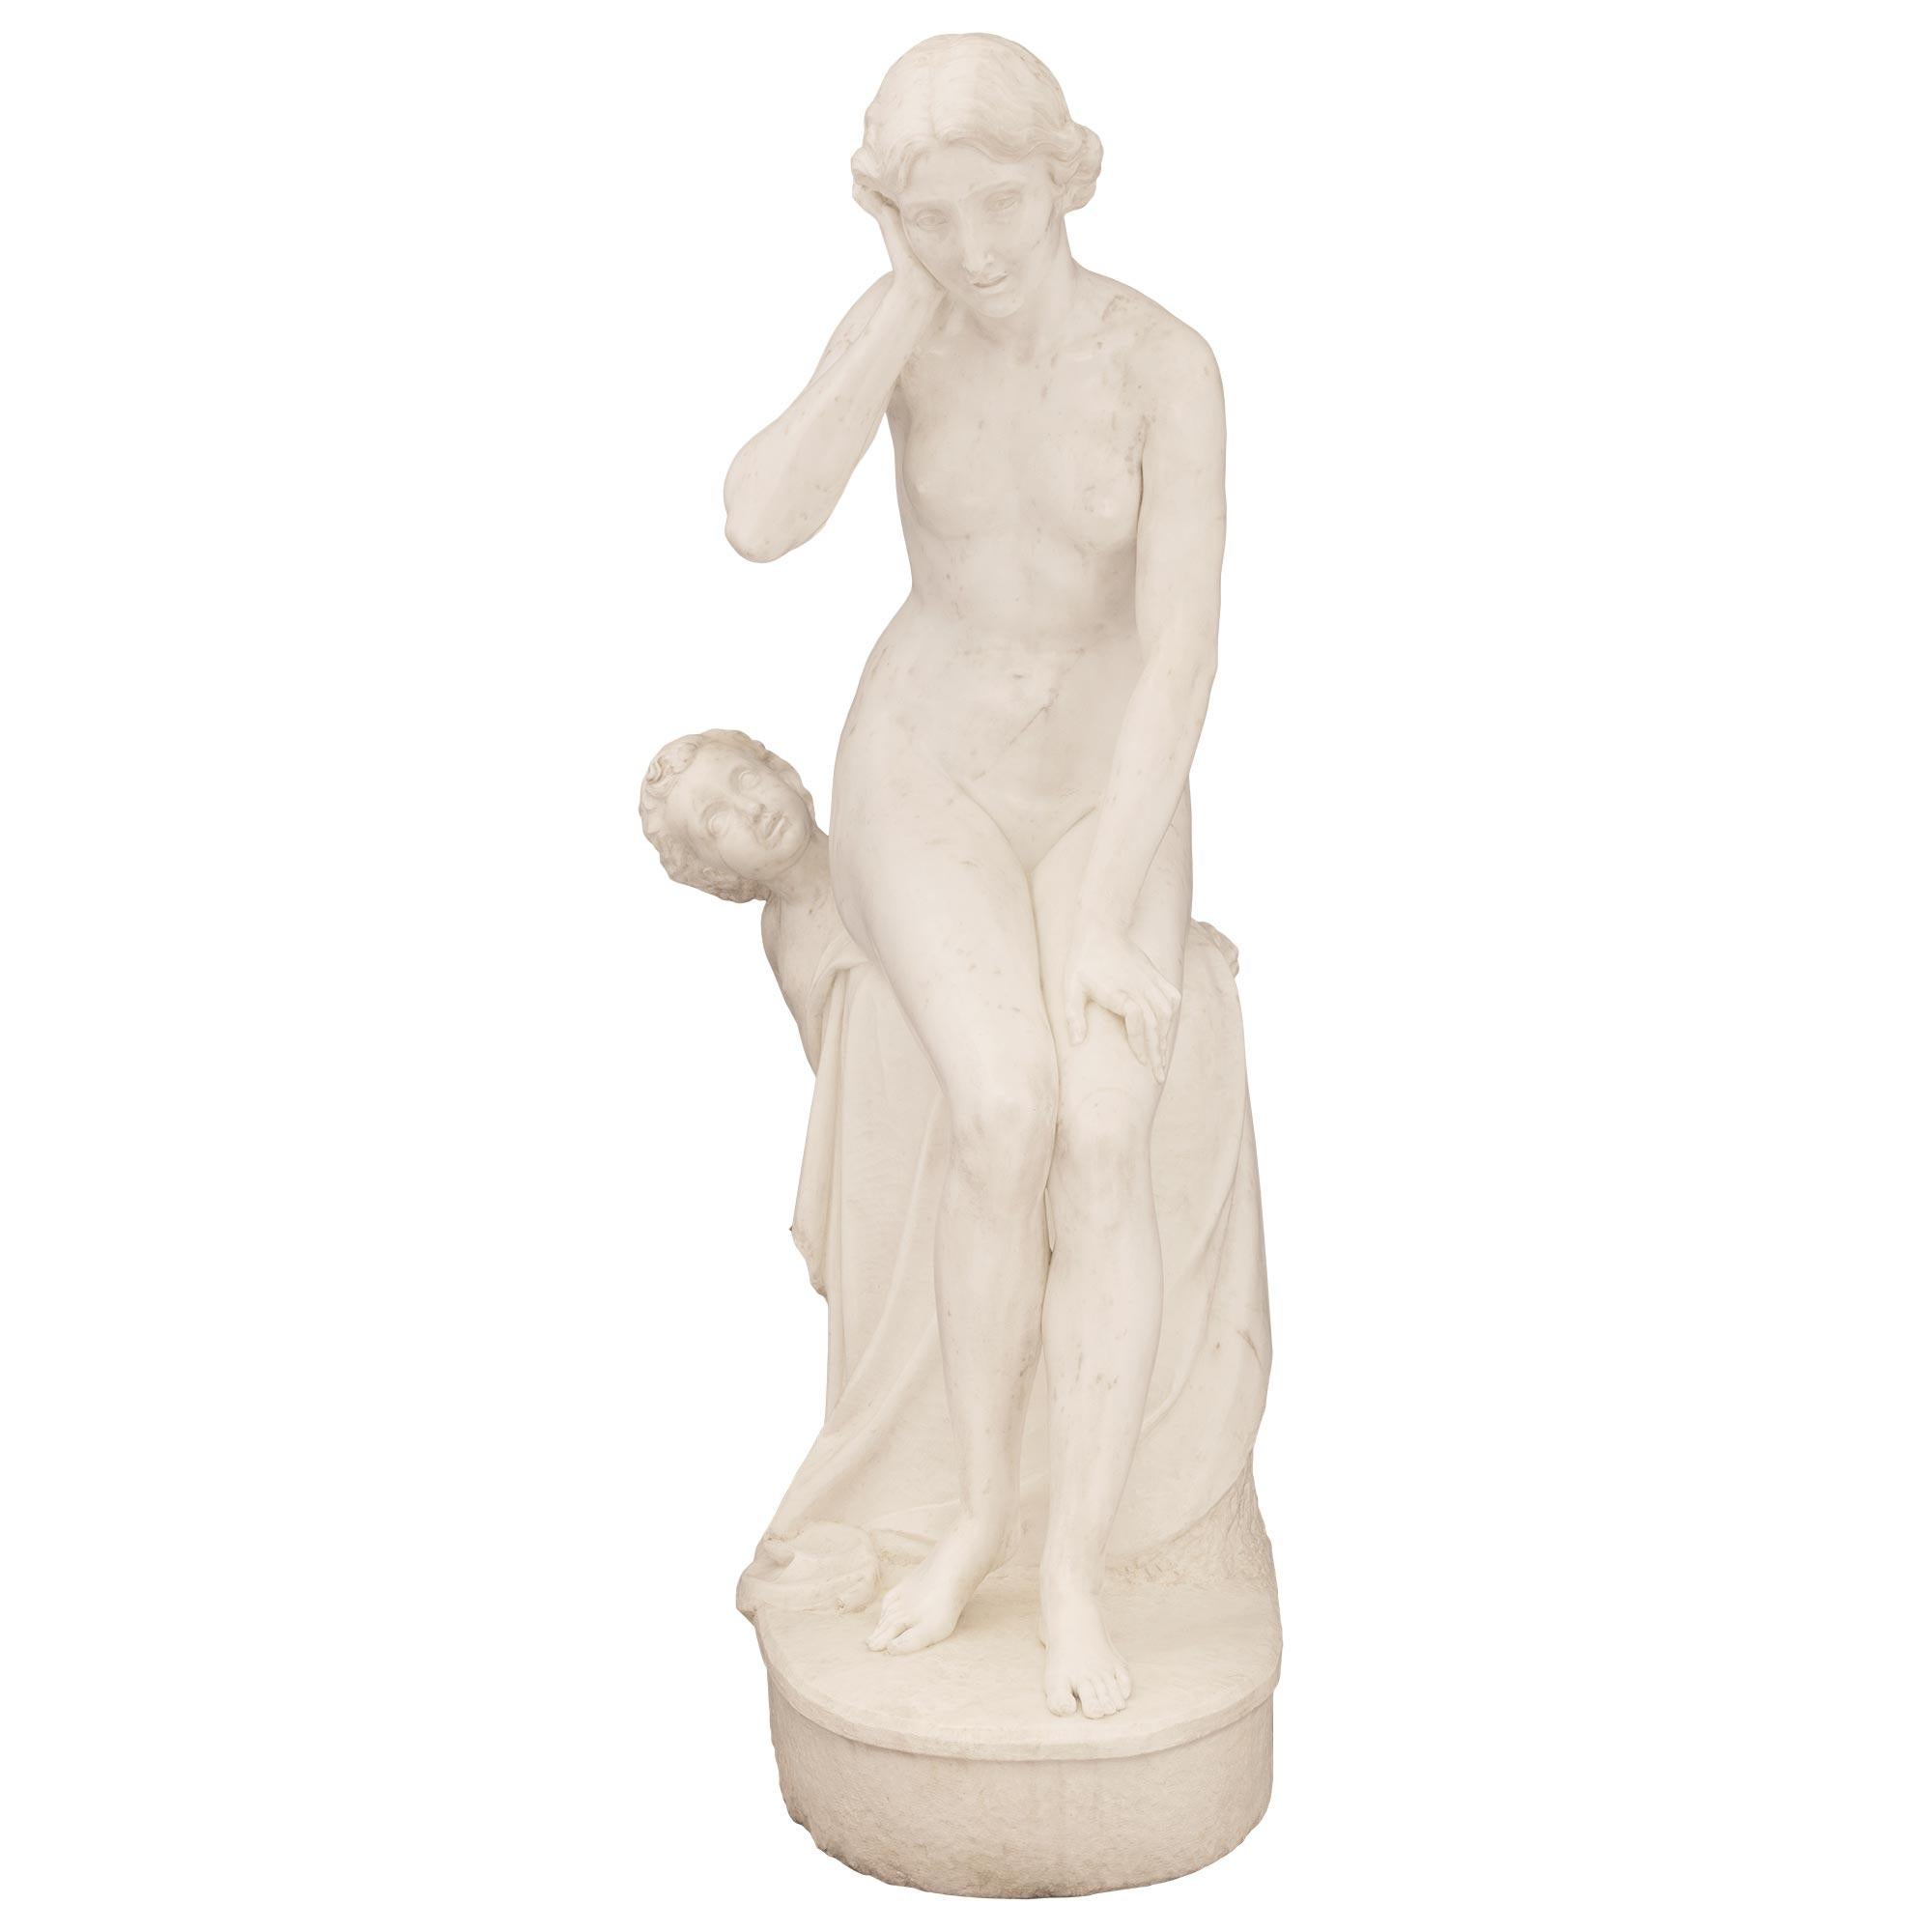 A stunning and extremely high quality French 19th century Neo-Classical st. white Carrara marble statue titled Not Wanting To Hear Love. The statue is raised by a oblong base with a fine ground design with a large rock draped in a wonderfully